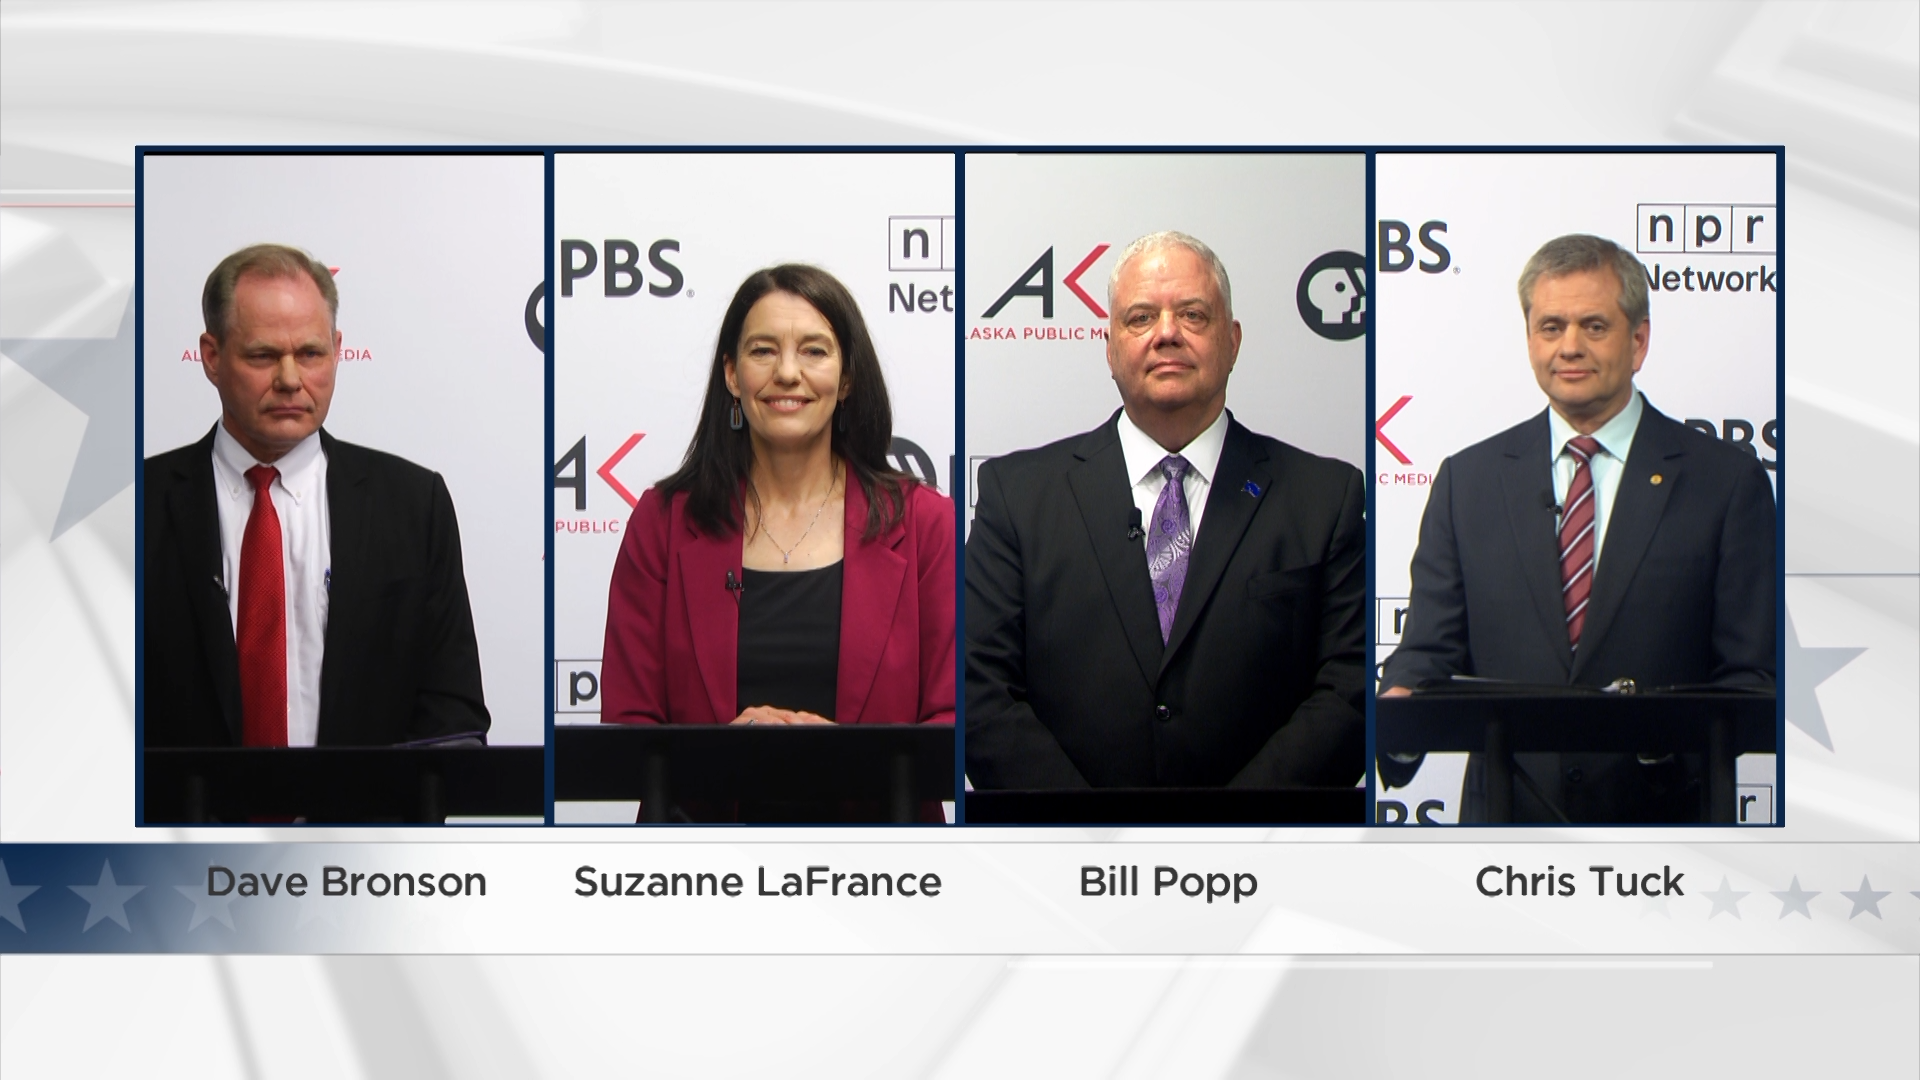 Four people, a man in a suit with red tie, a woman with a deep red blazer, a man in a suit with purple tie, and a man in a suit with a striped tie stand behind podiums in front of a white backdrop with the logos for PBS, NPR, and Alaska Public Media preparing for a debate.